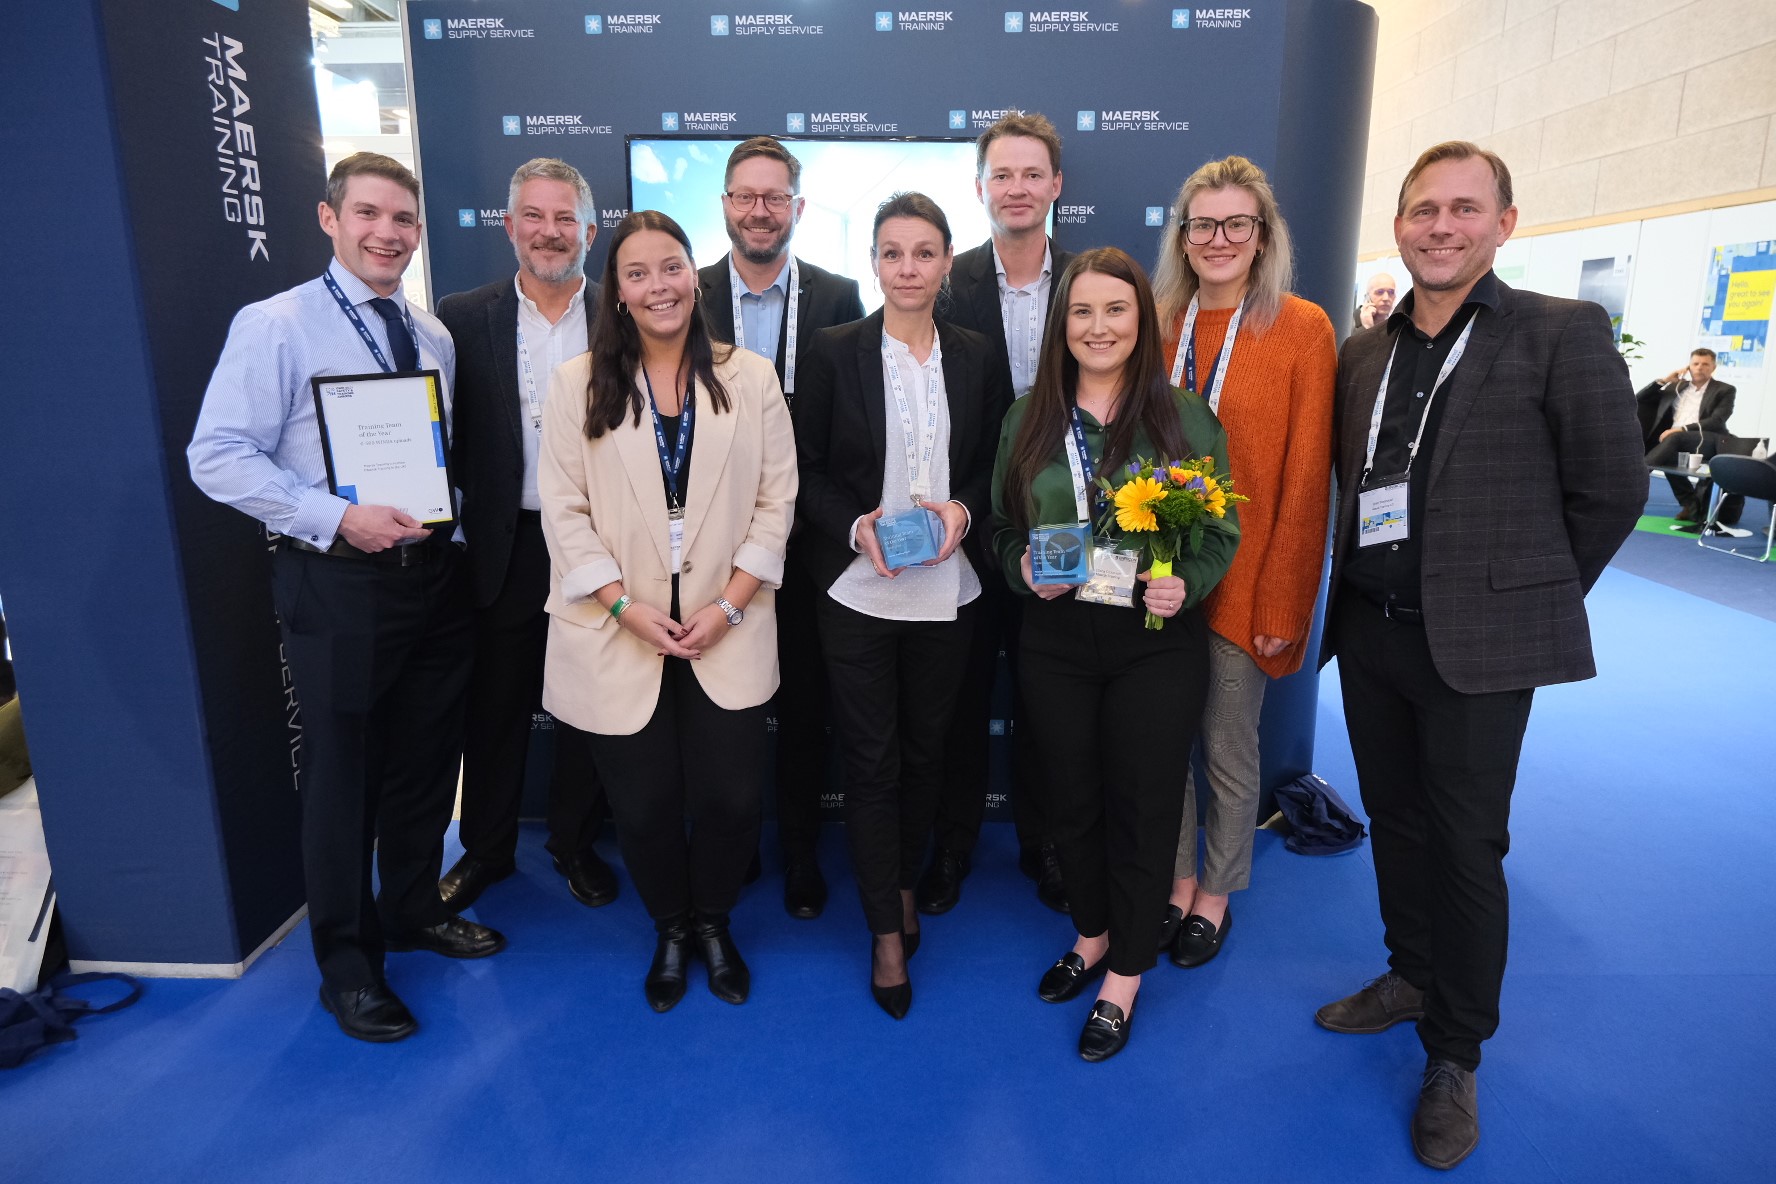 MEMBER NEWS: Maersk Training wins two coveted safety and training awards at newly launched Global Wind Organisation award ceremony